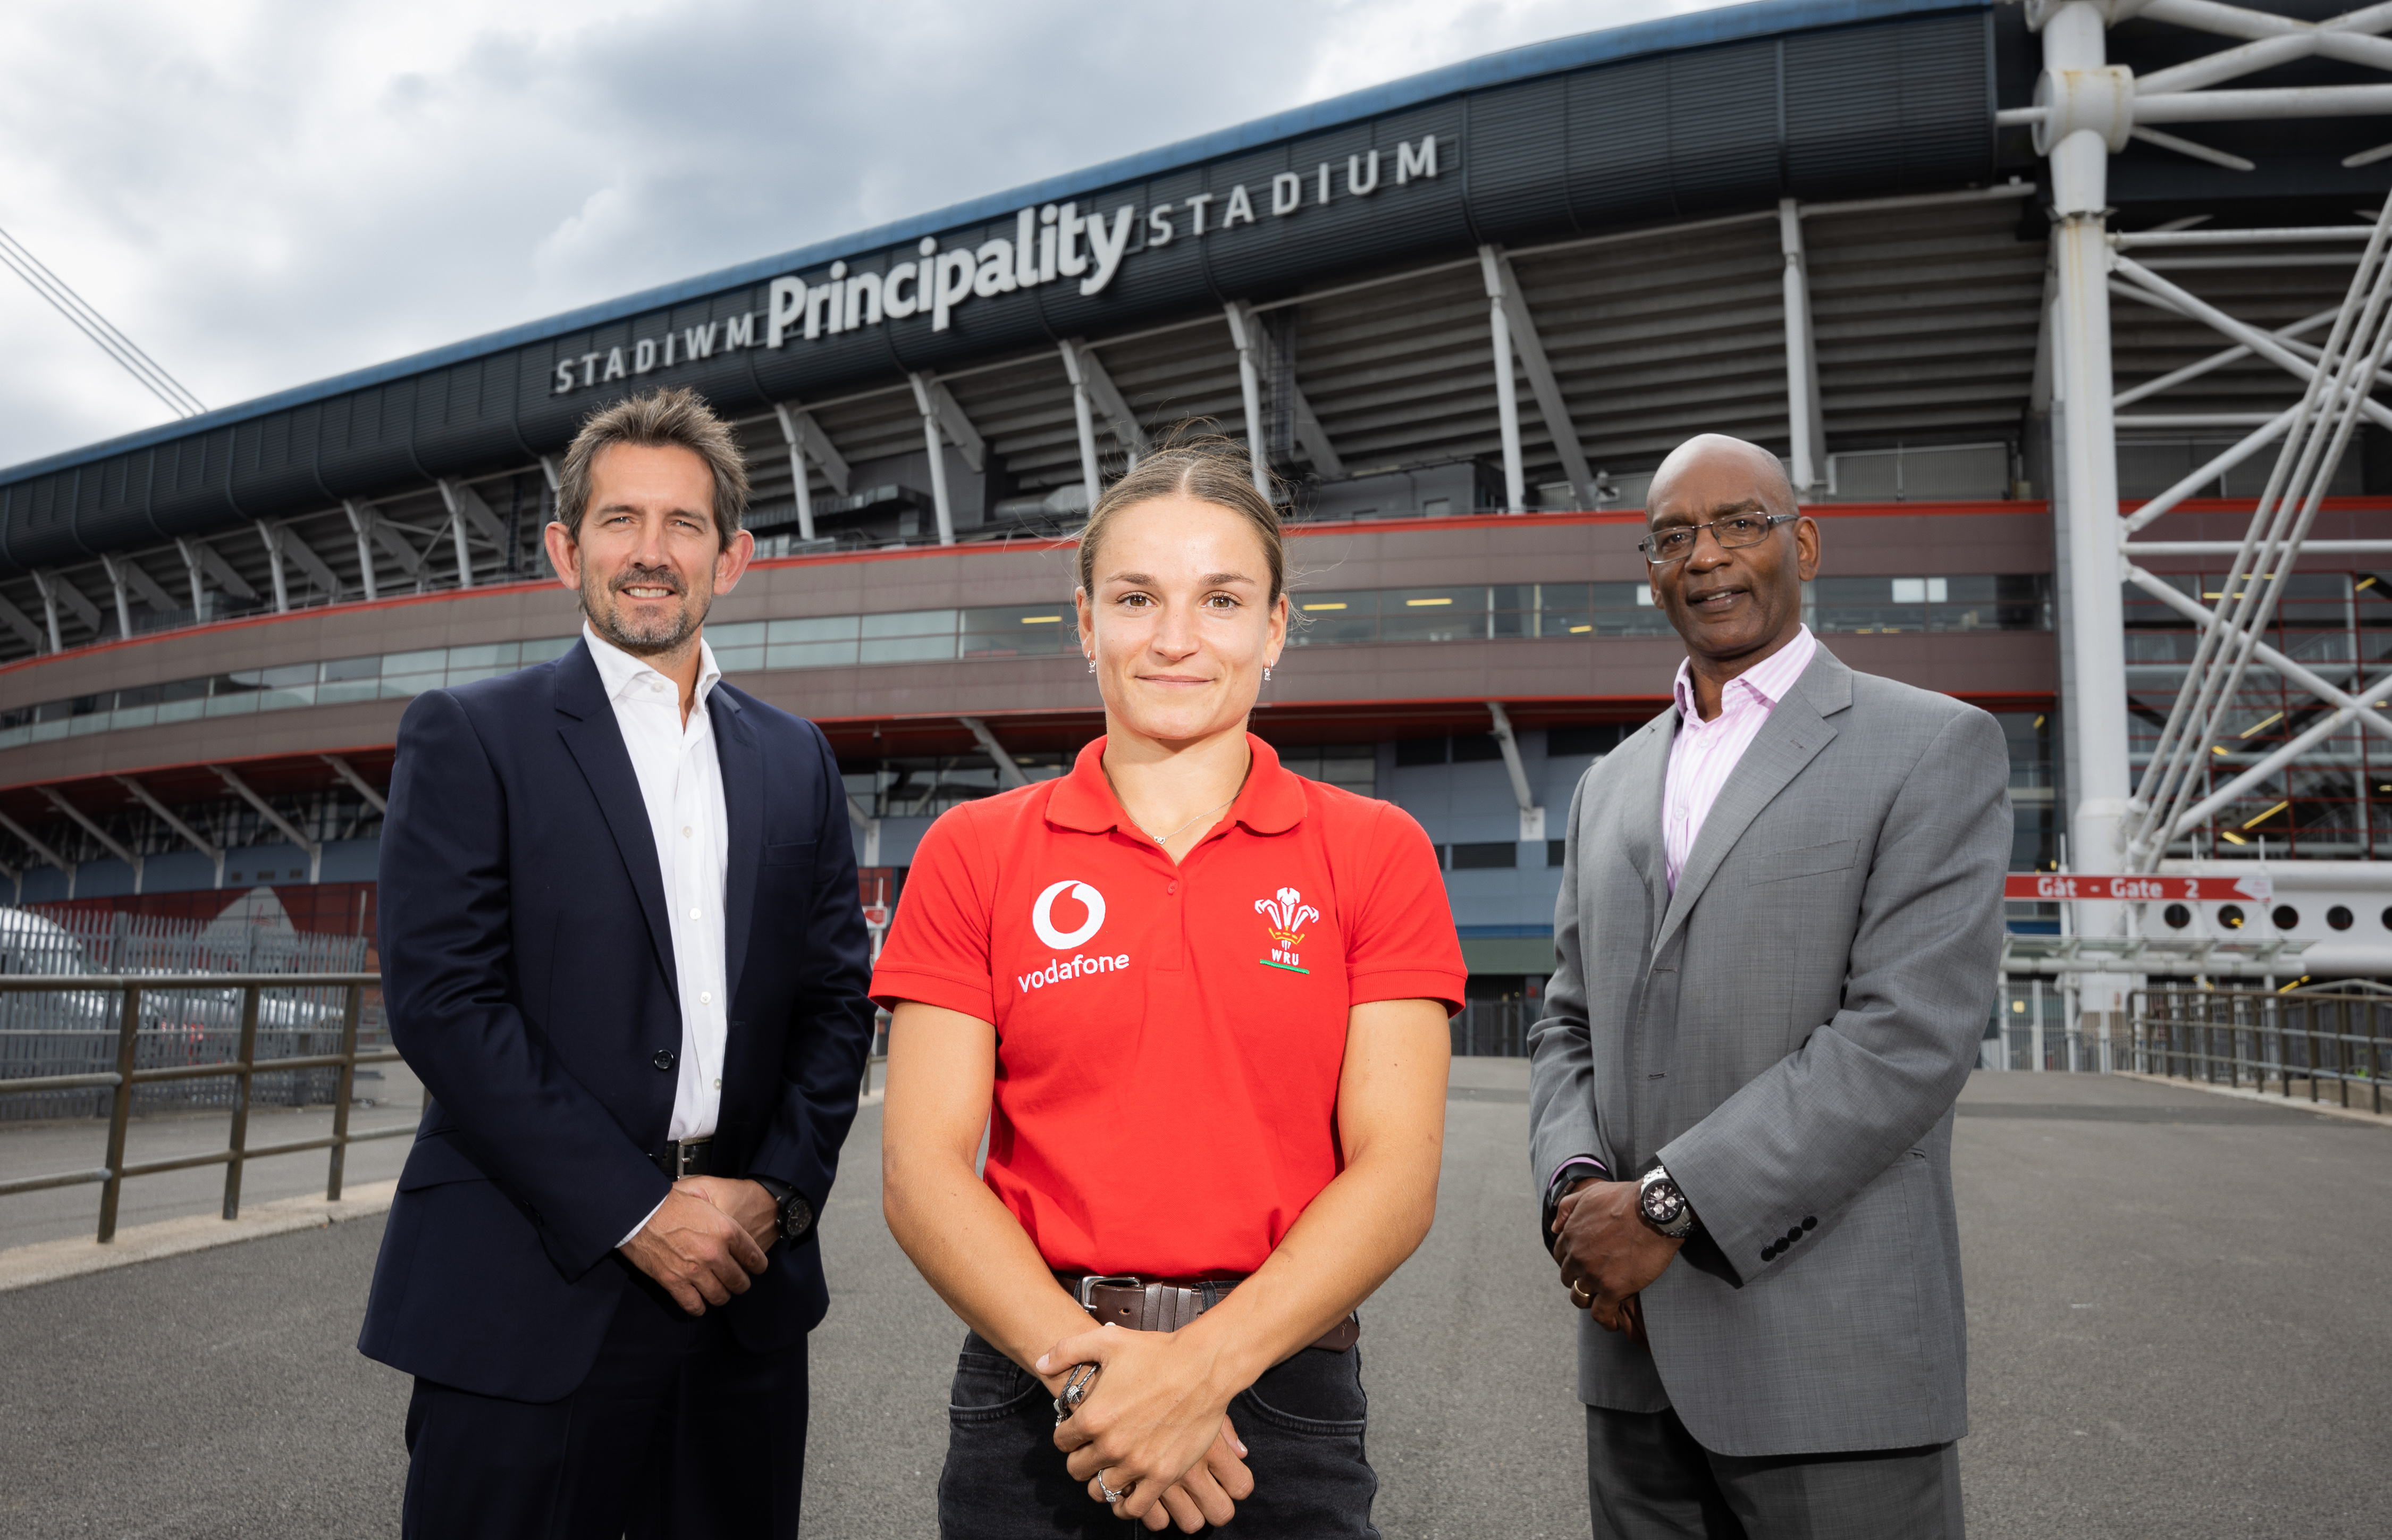 Vodafone to bring fans closer to the action